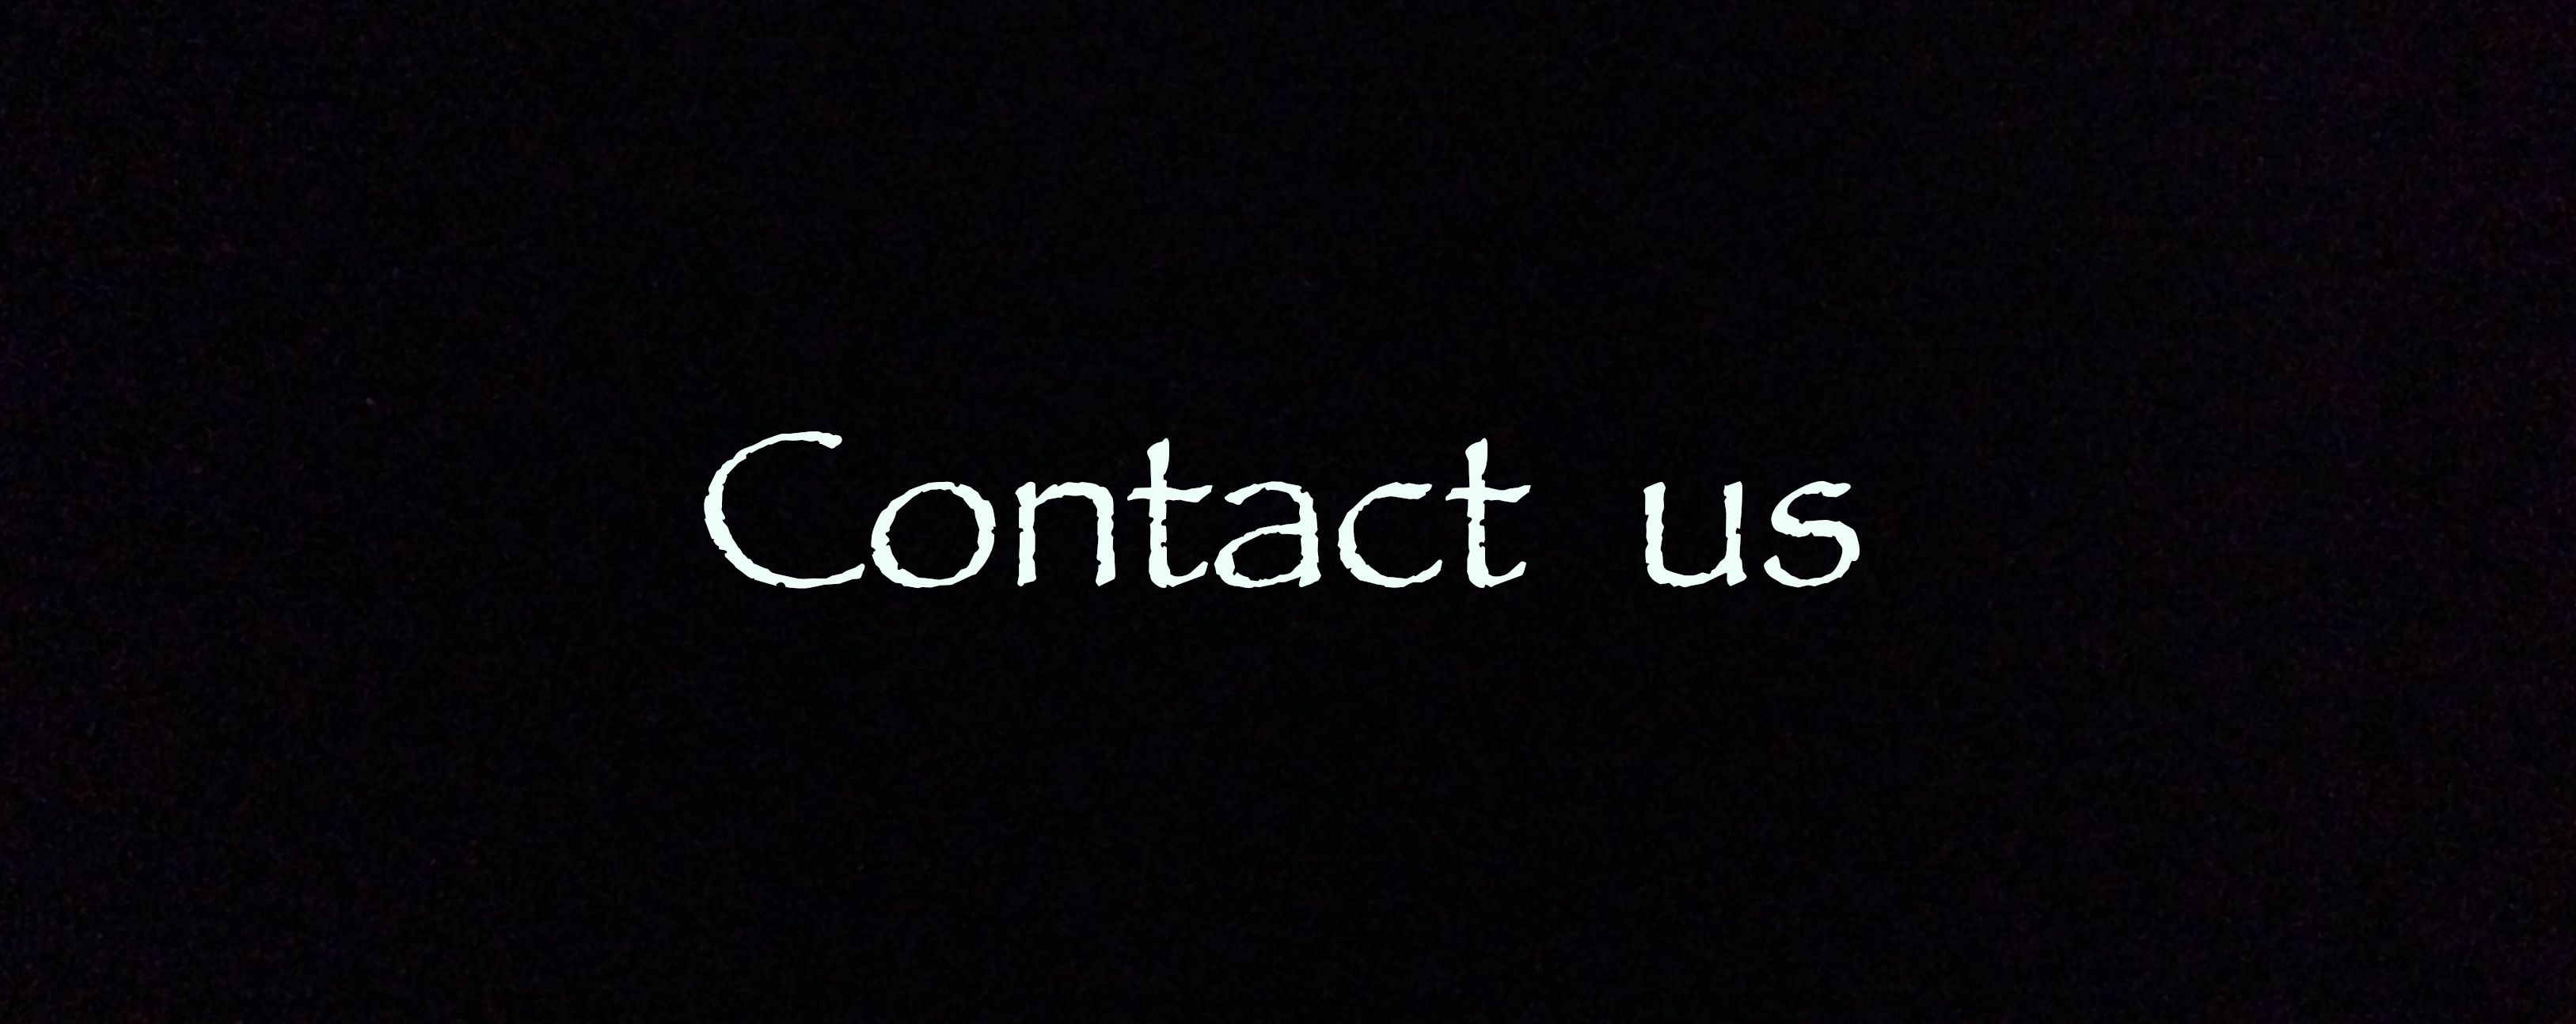 click to contact us